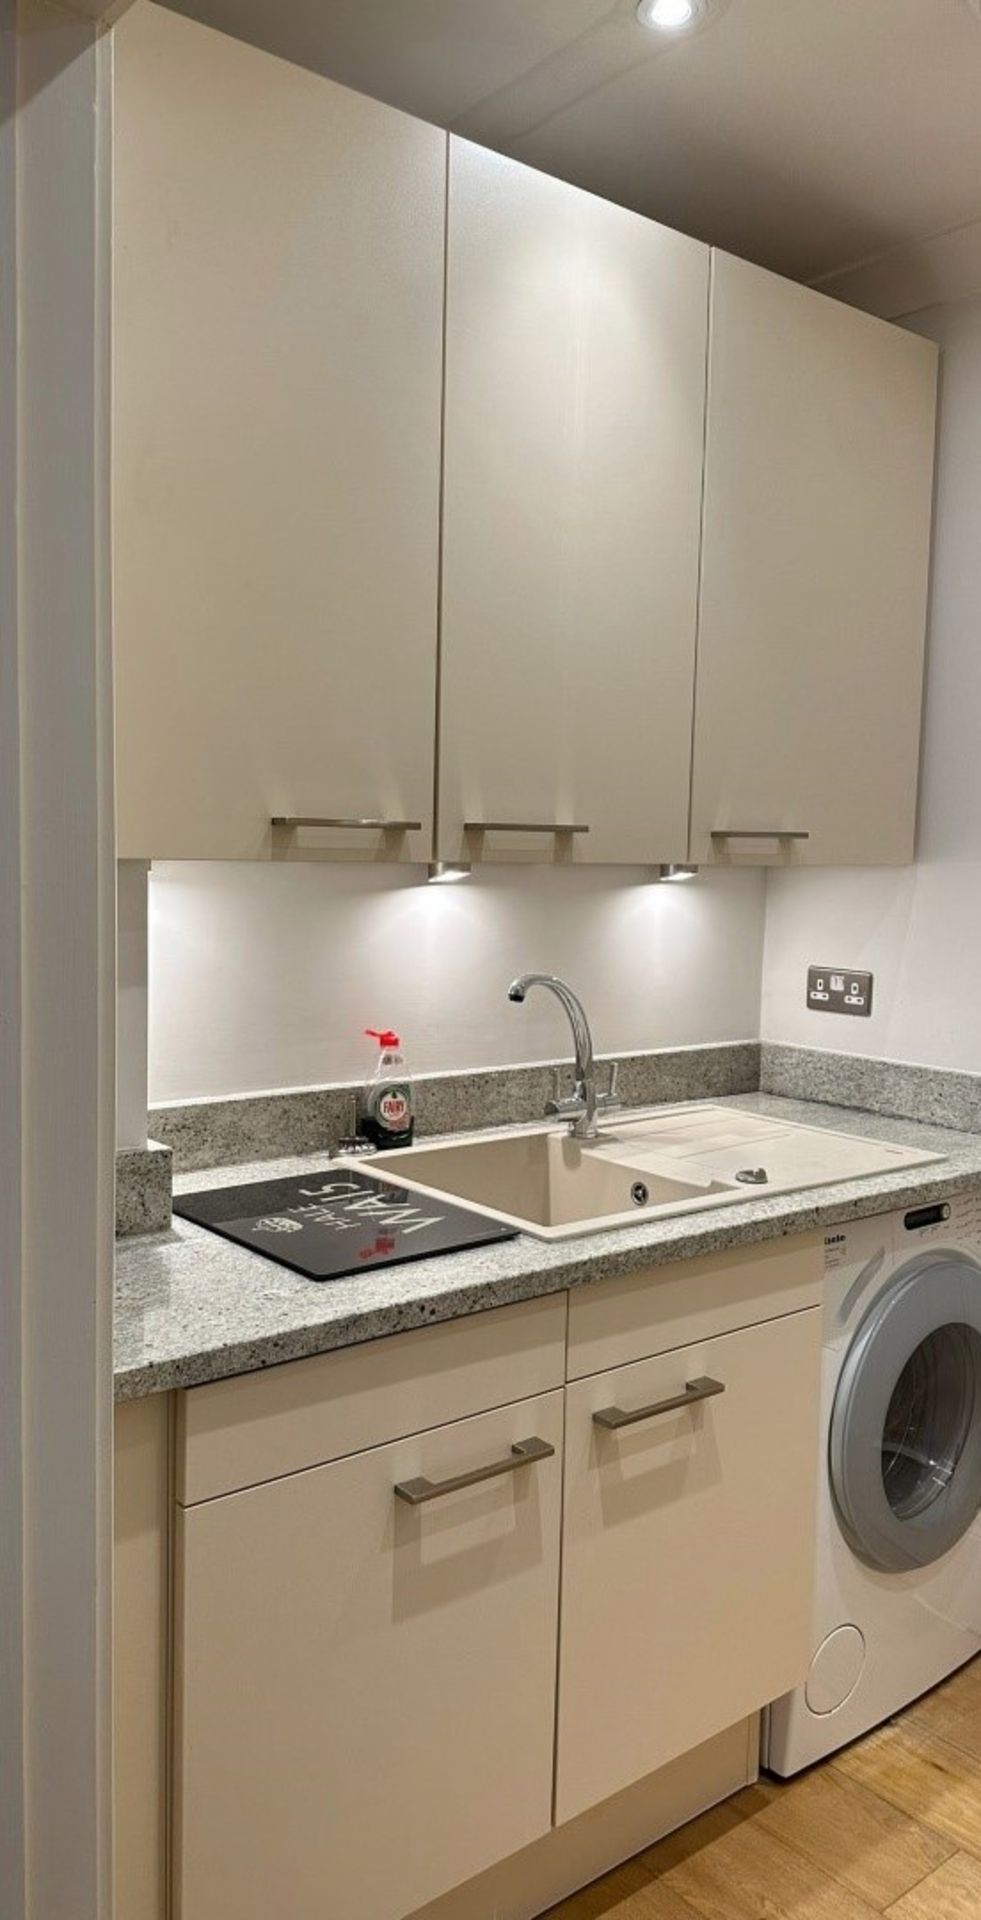 1 x Stunning SIEMATIC Luxury Fitted Handleless Kitchen With Marble Worktops - Original Cost £60,000 - Image 15 of 51